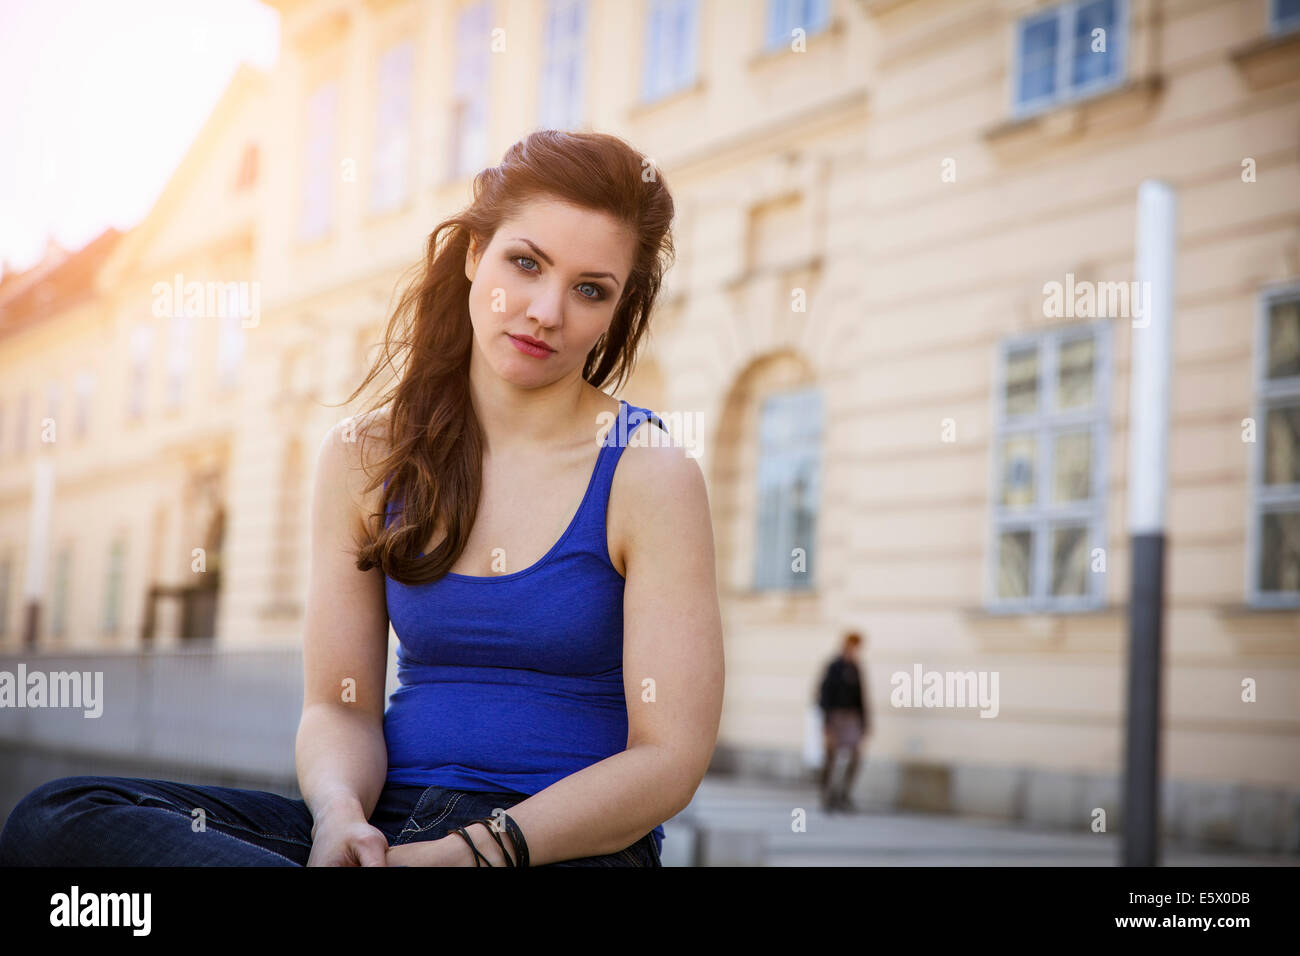 Portrait of young adult woman Stock Photo